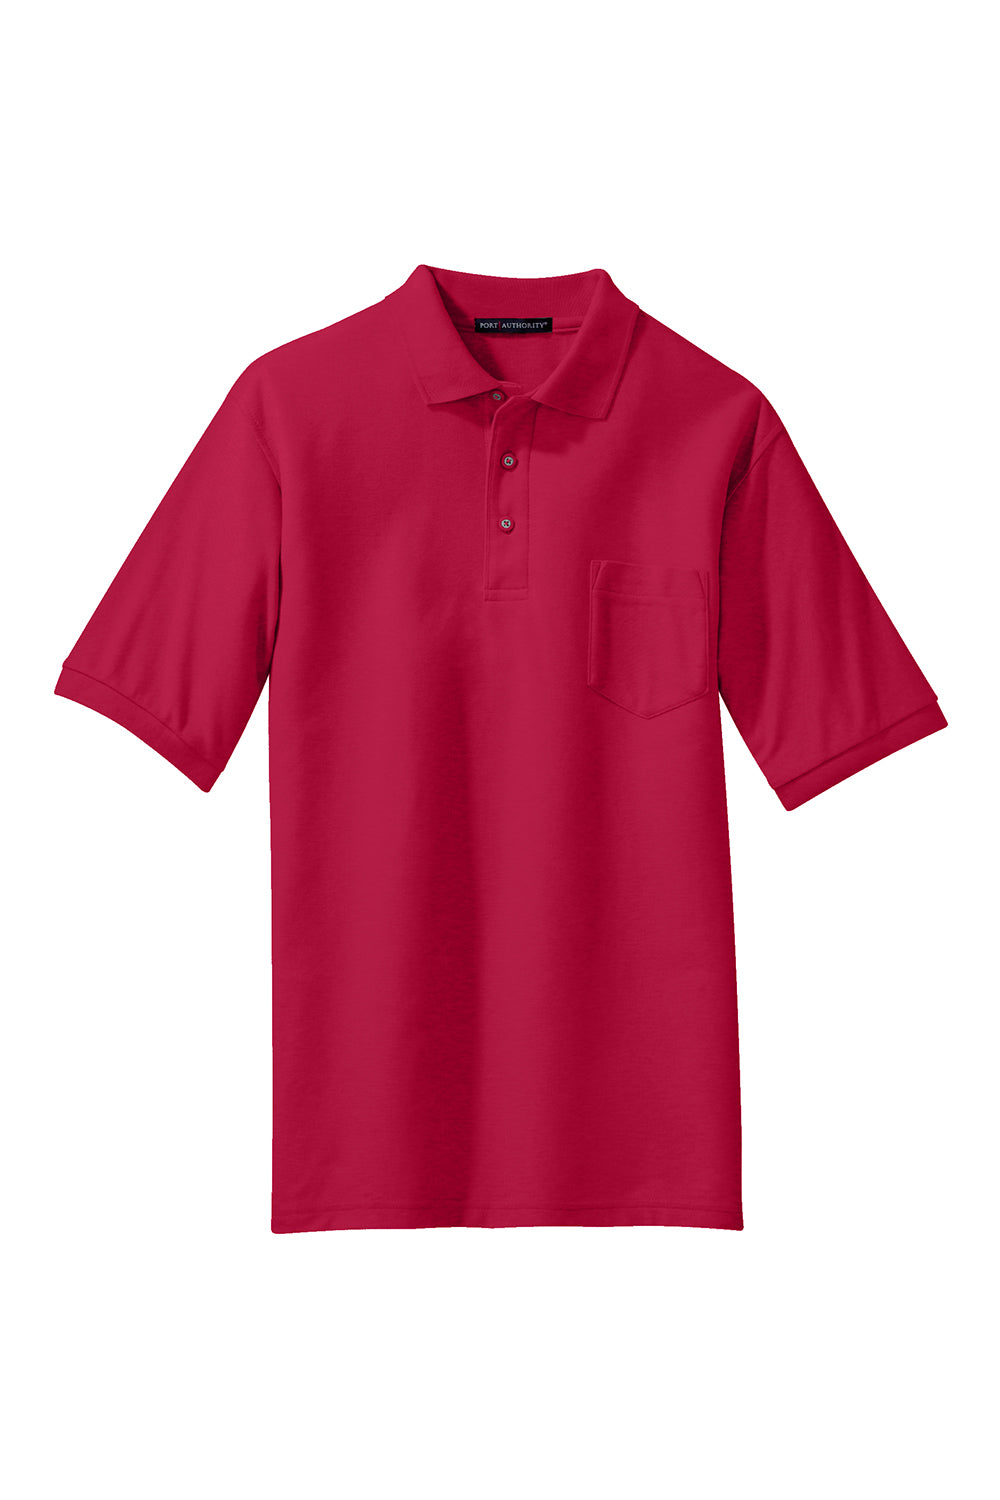 Port Authority K500P Mens Silk Touch Wrinkle Resistant Short Sleeve Polo Shirt w/ Pocket Red Flat Front